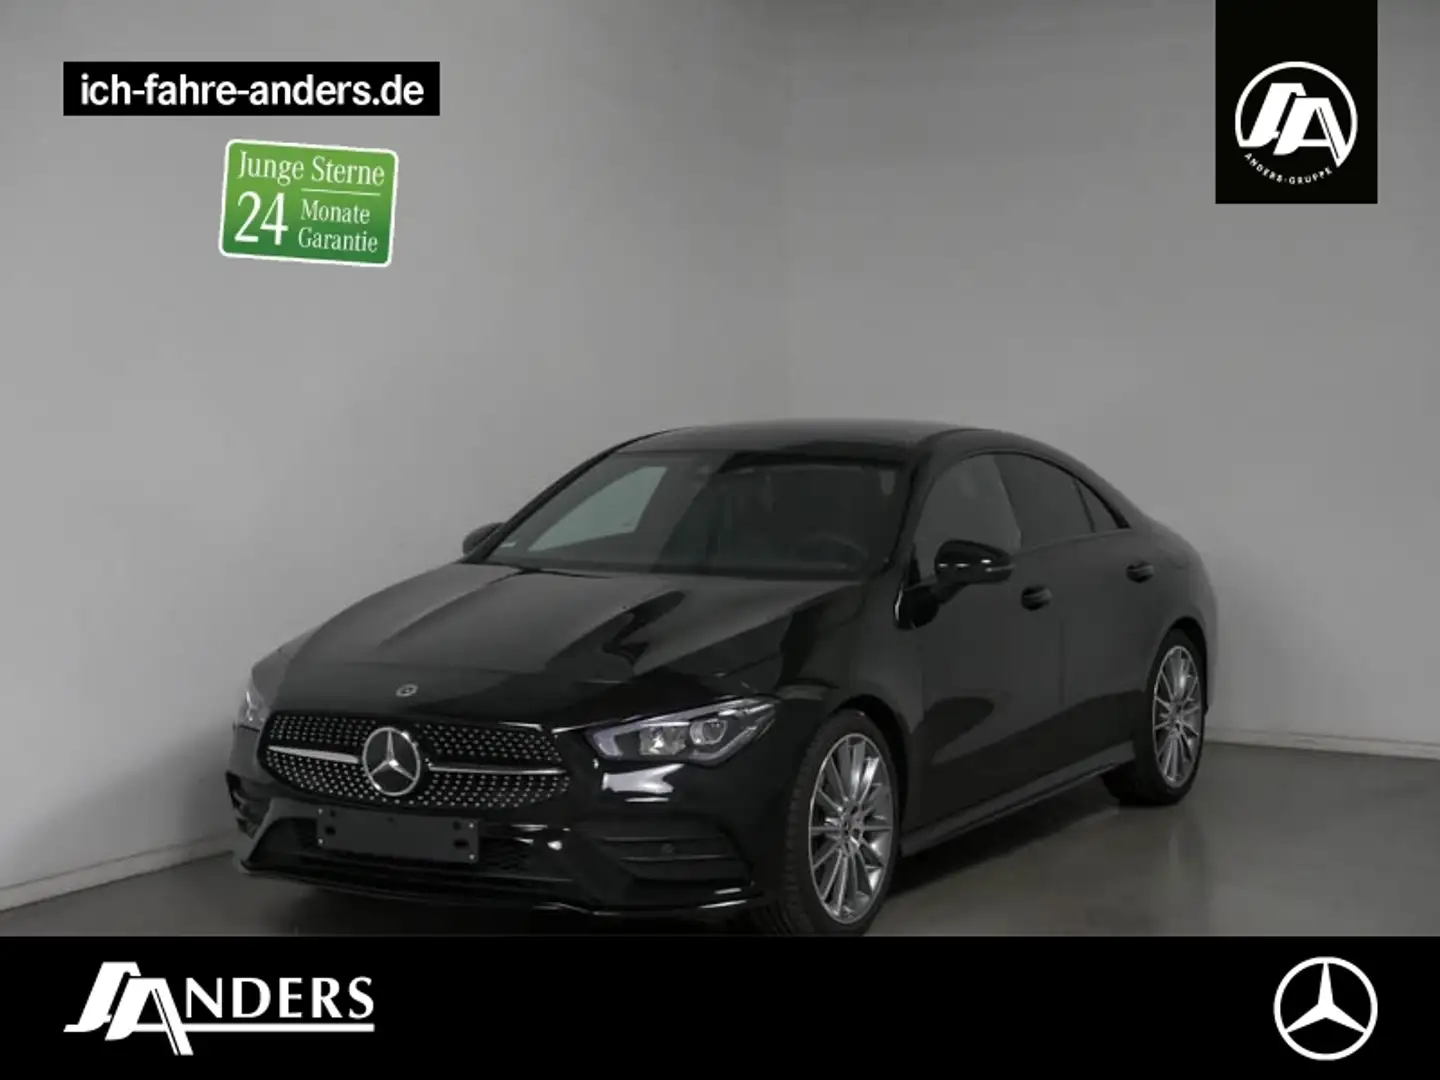 Mercedes-Benz CLA 200 Coupé AMG+MBUX+Night+LED+Kam+Pano+Ambien Nero - 1